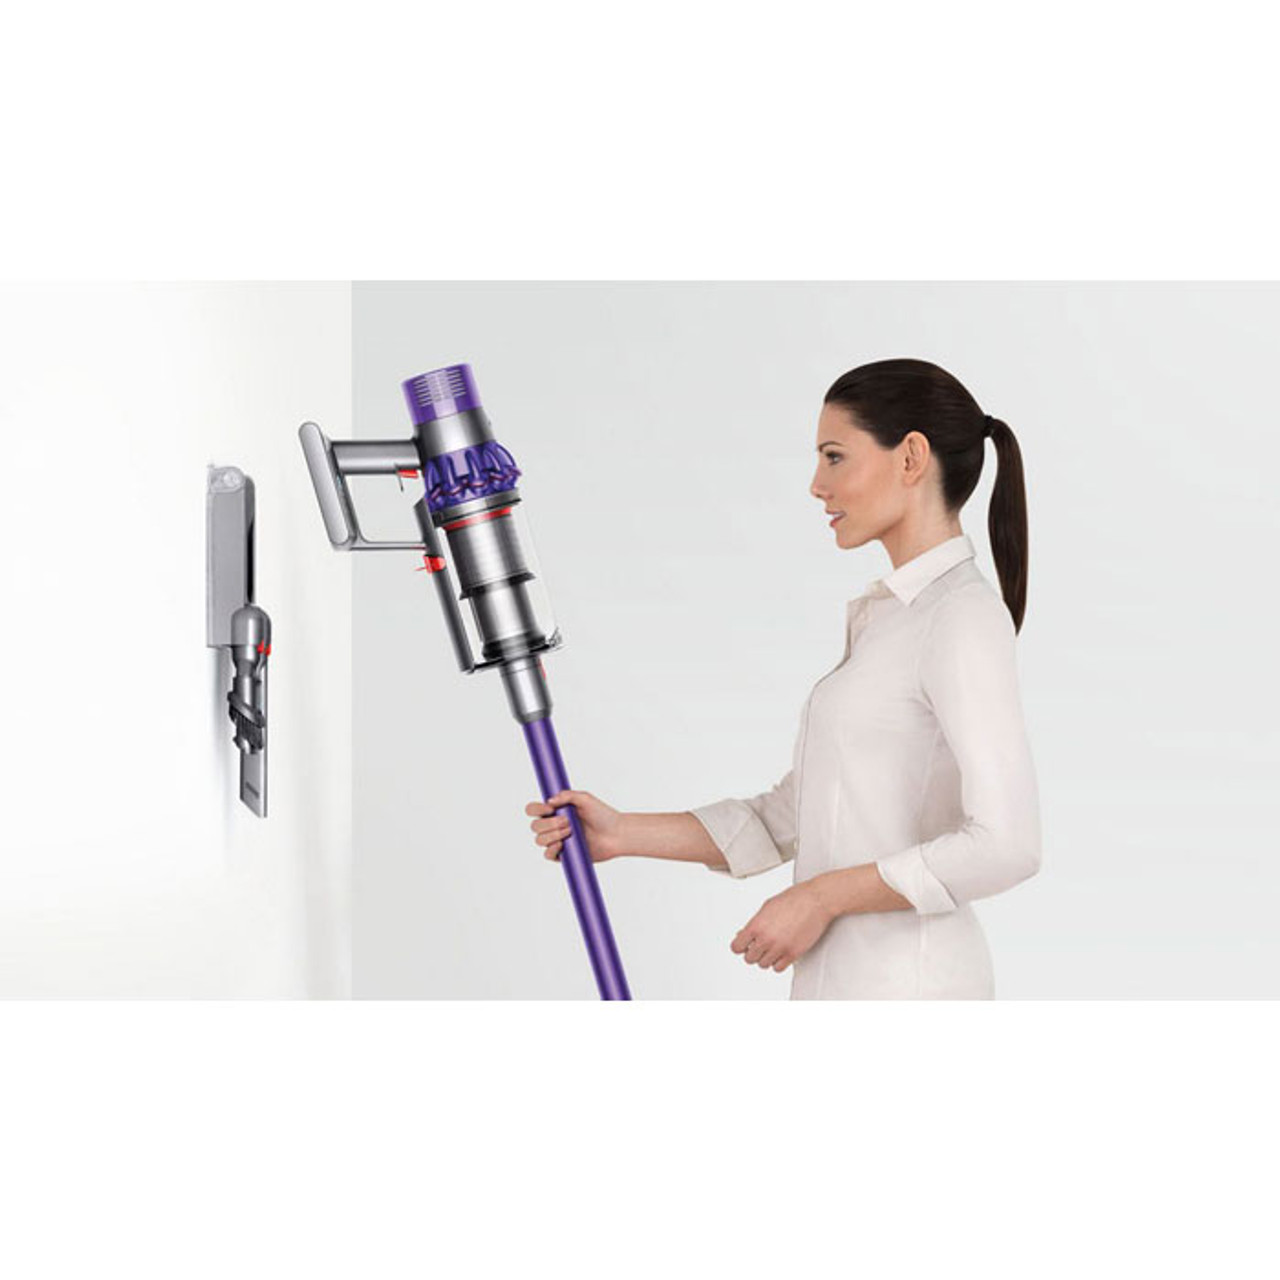 Buy Dyson Cyclone V10 Animal + Cordless Vacuum SV27 from Canada at  McHardyVac.com